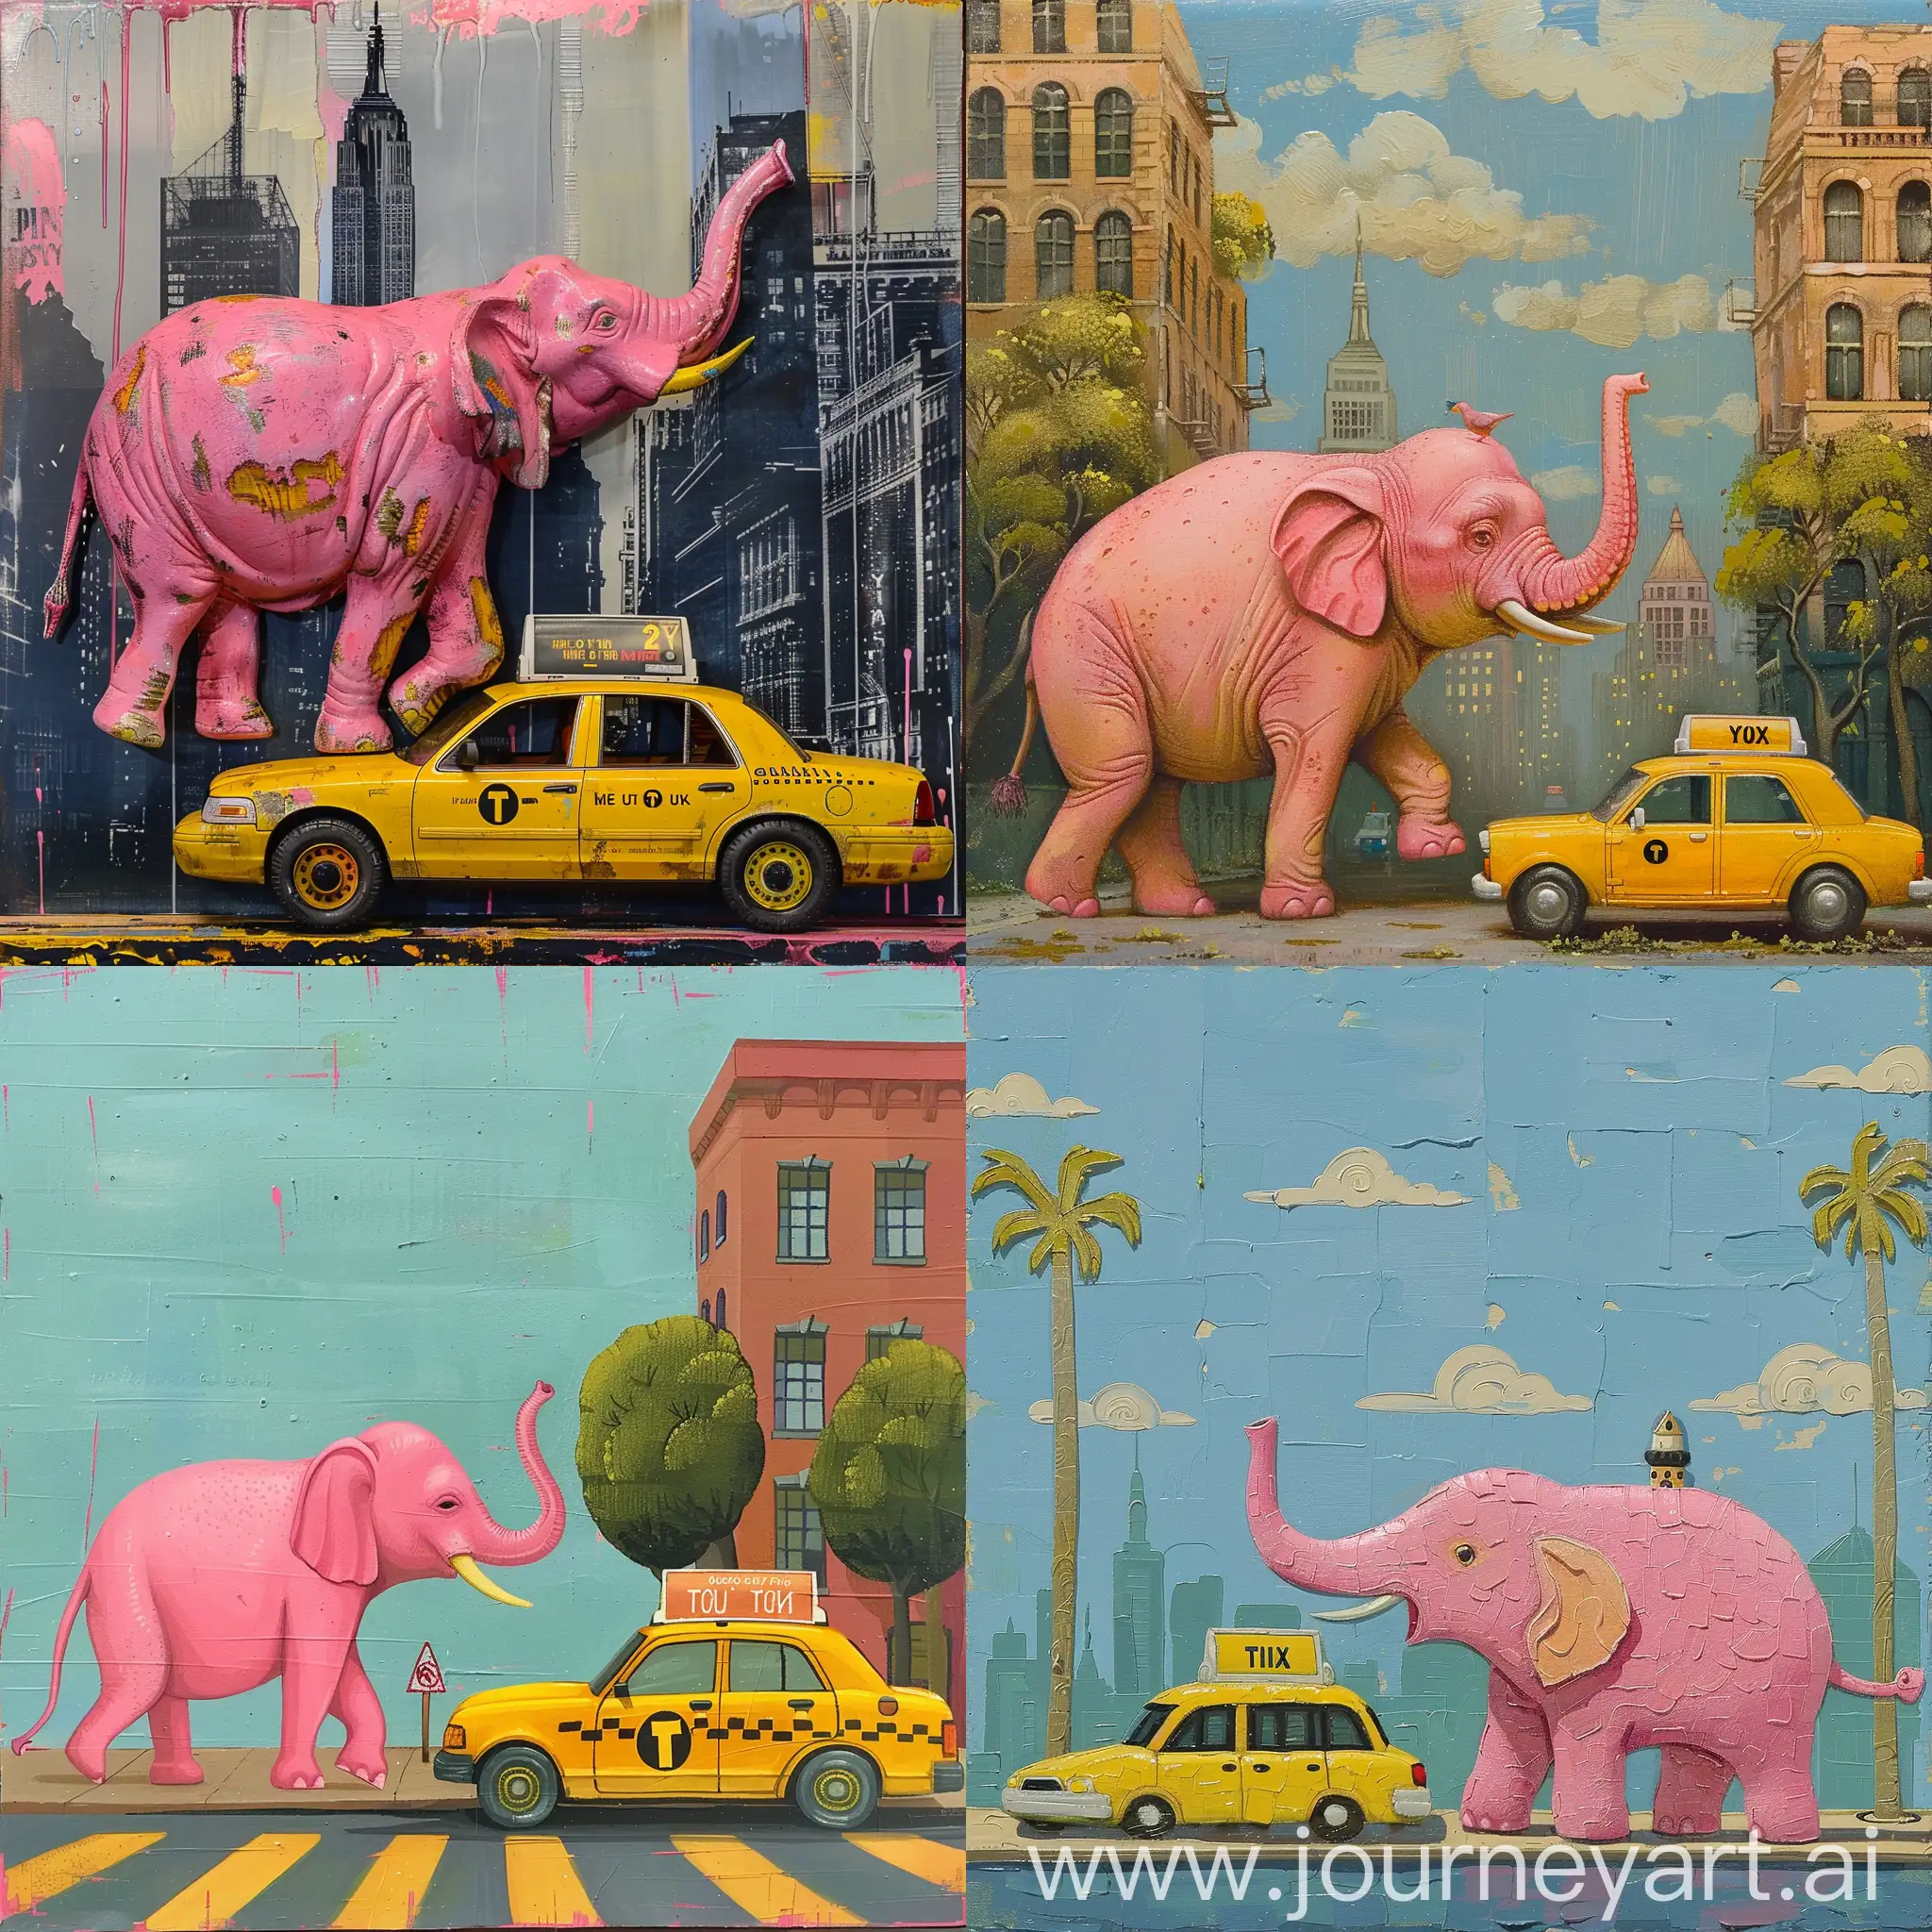 Vibrant-Pink-Elephant-and-Yellow-Taxi-Encounter